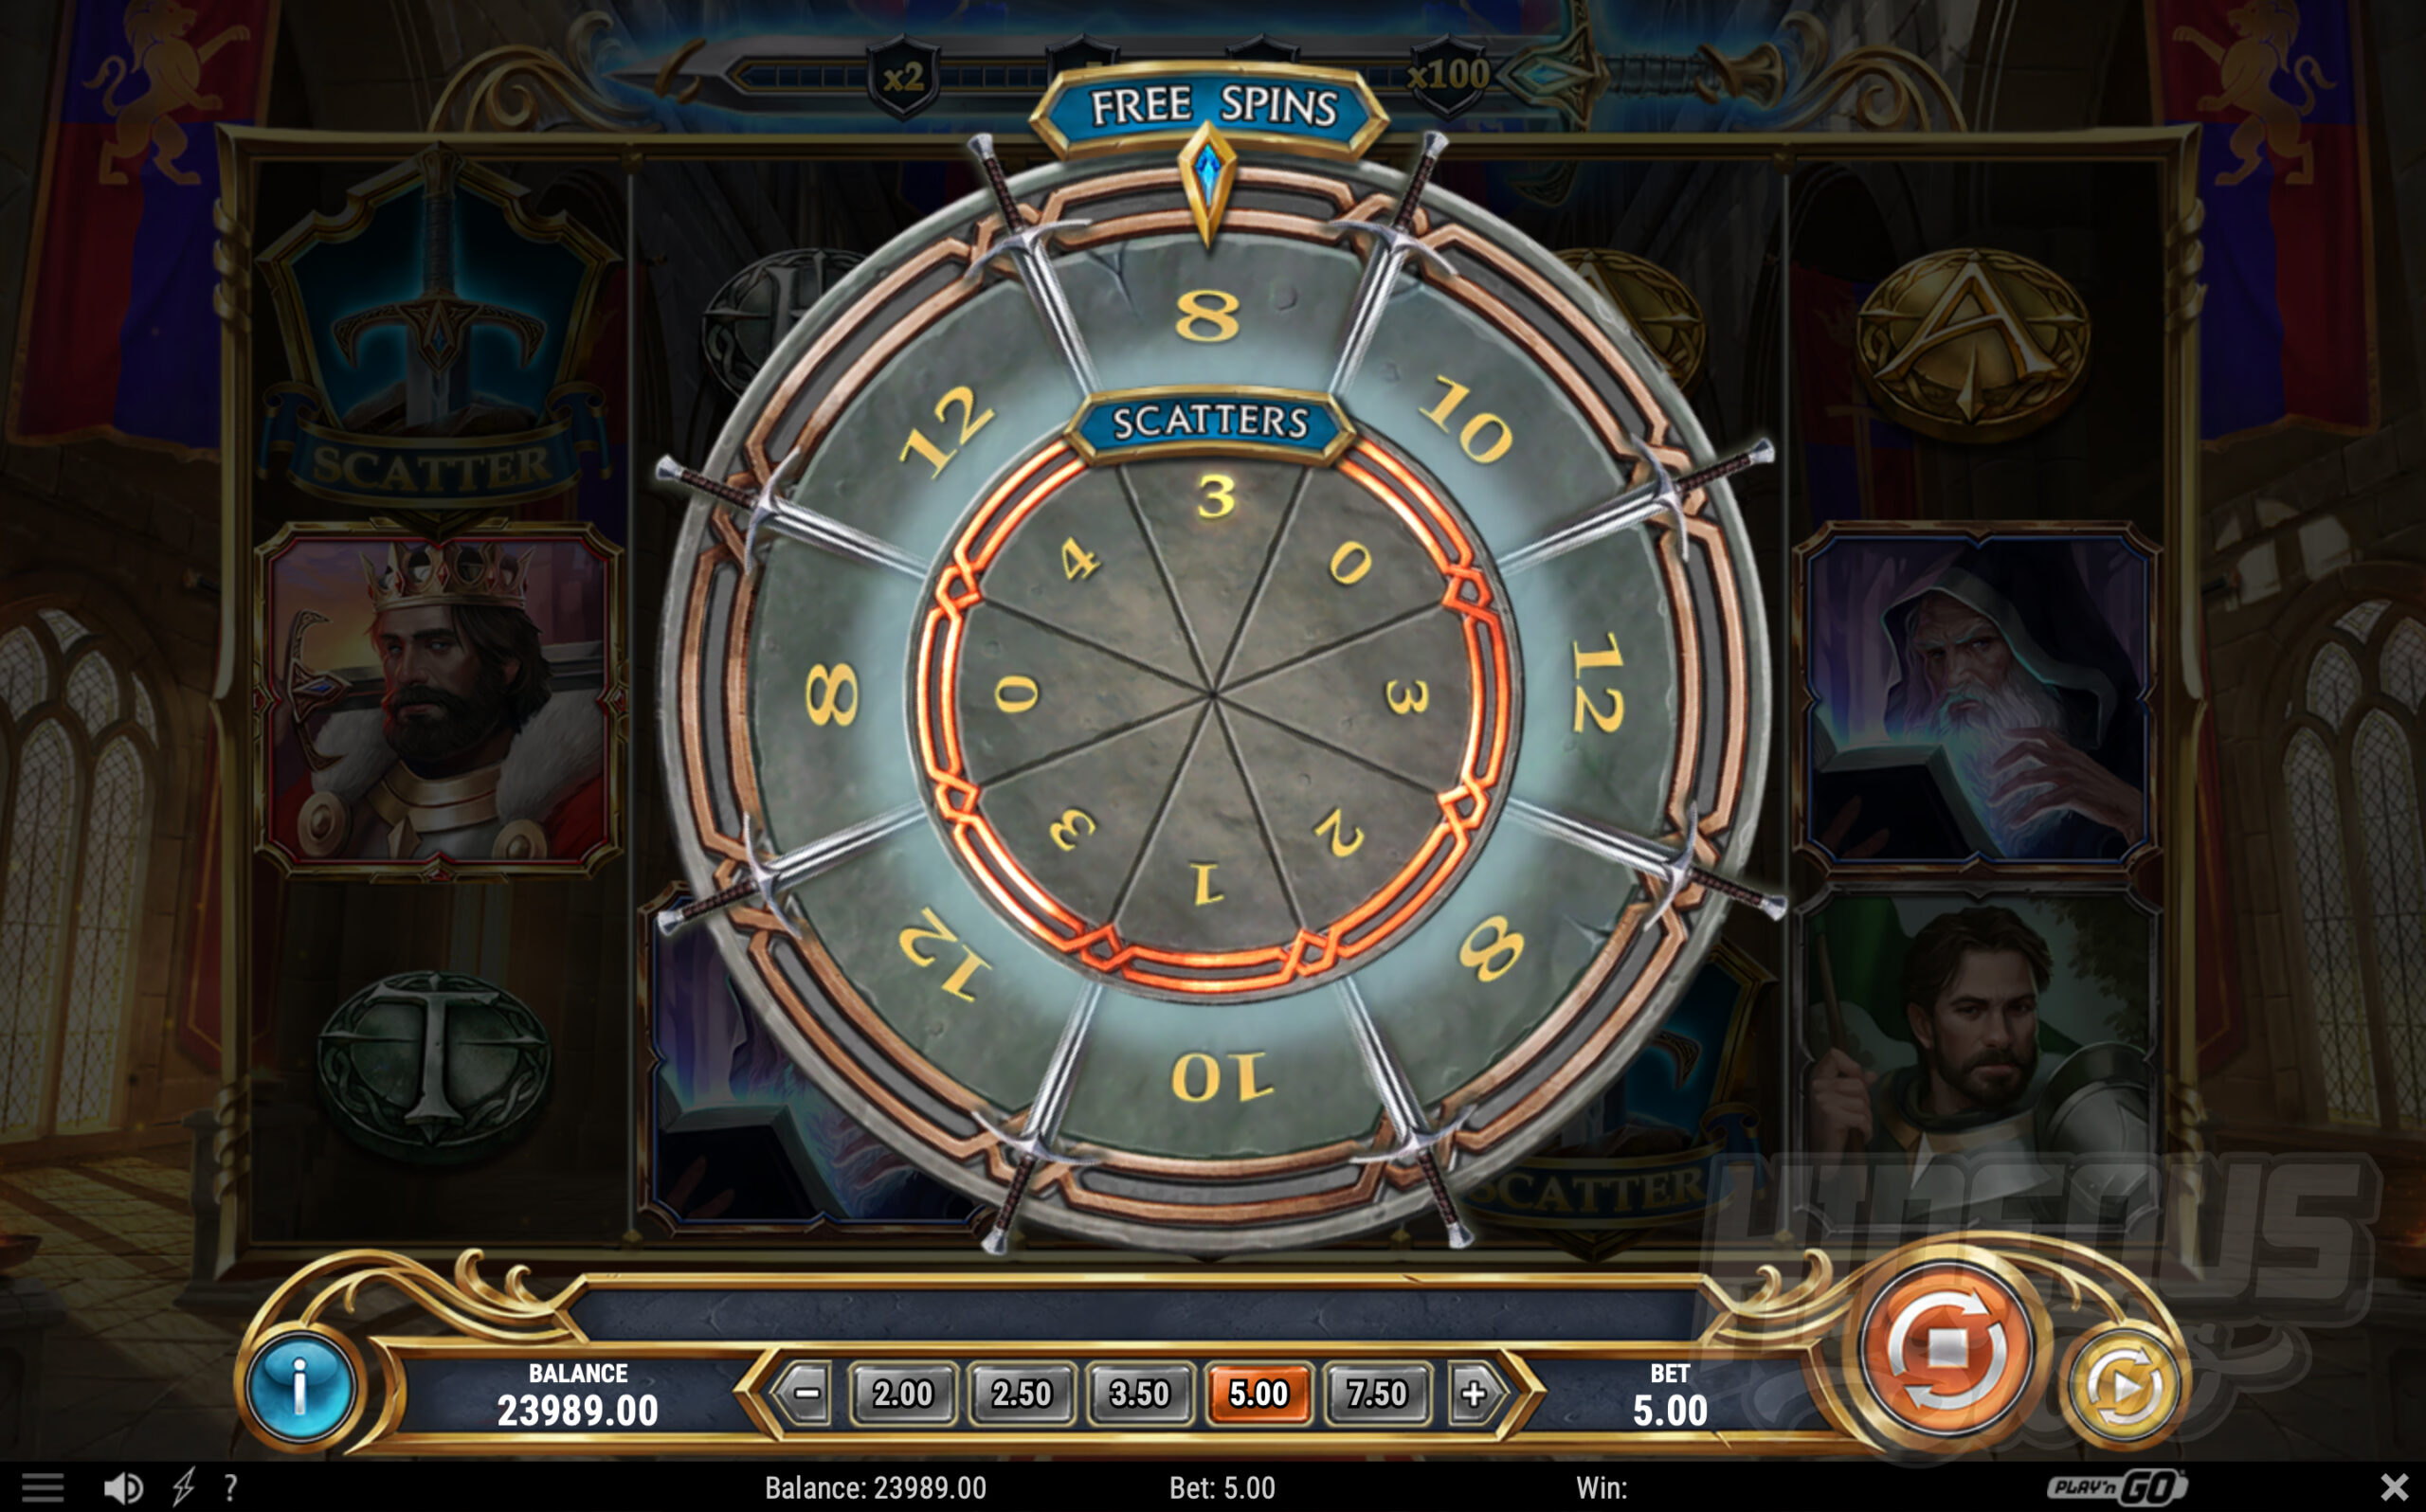 The Round Table Wheel Will Determine the Initial Free Spins and Sword Scatters